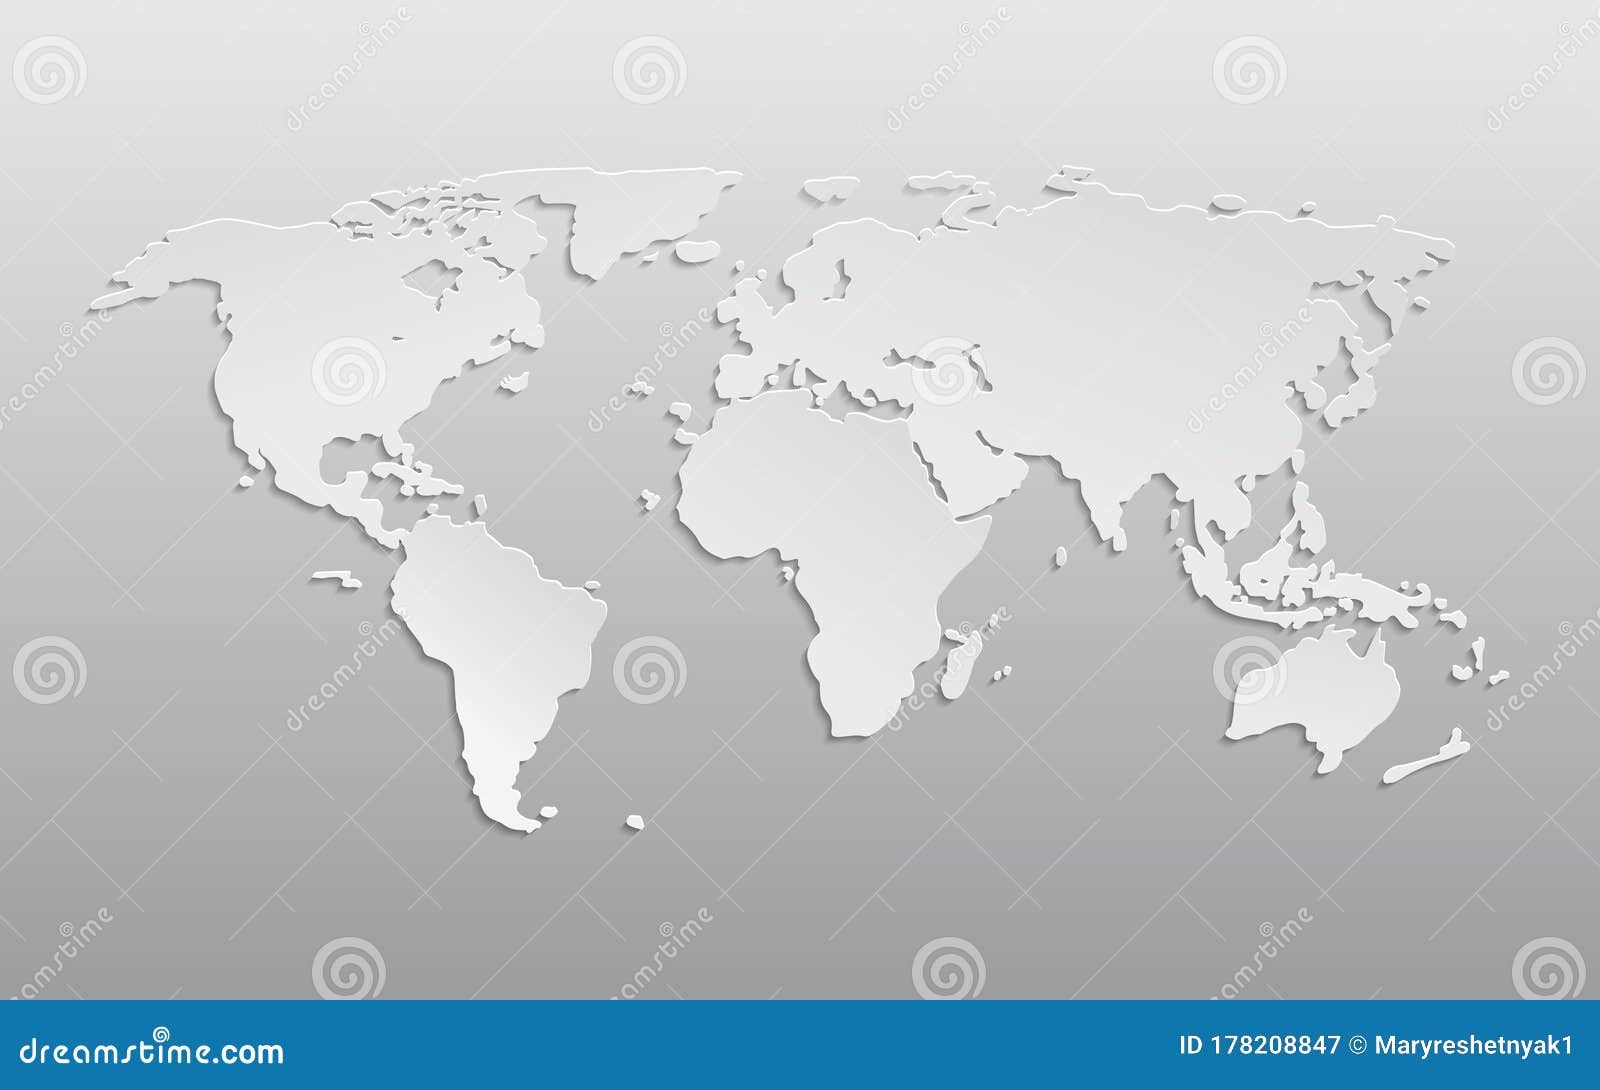 white paper world map. 3d atlas earth with continents america, europe, asia, africa. graphic planet with shadow. politic